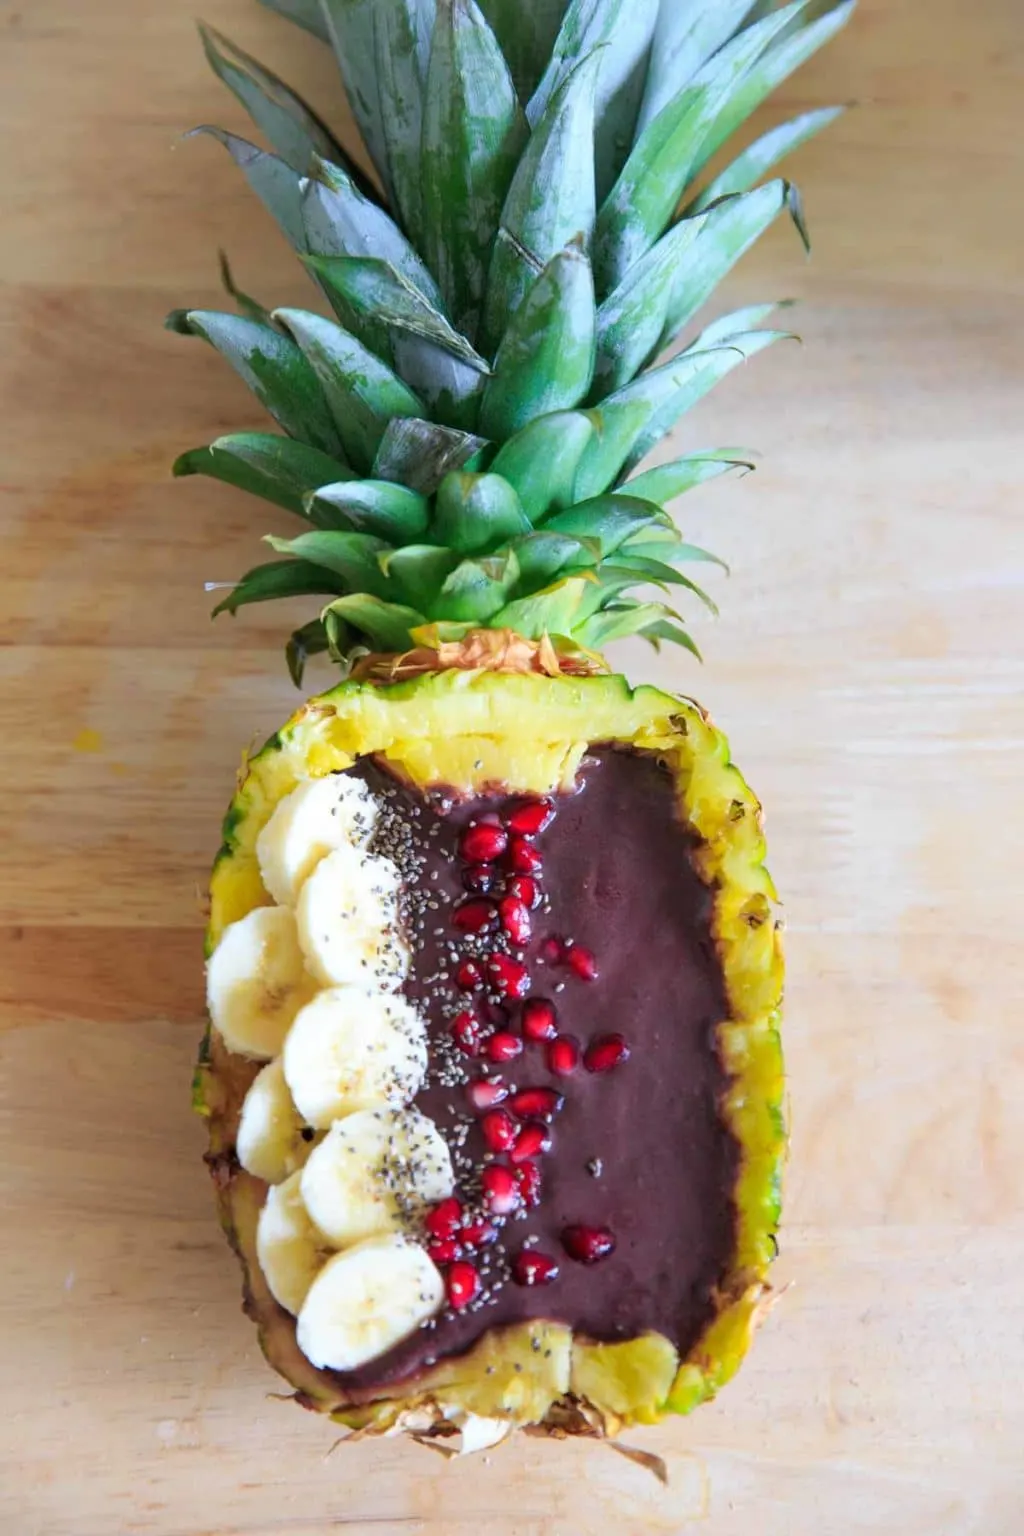 Full Pineapple with banana, pomegranate arils, and chia seeds.